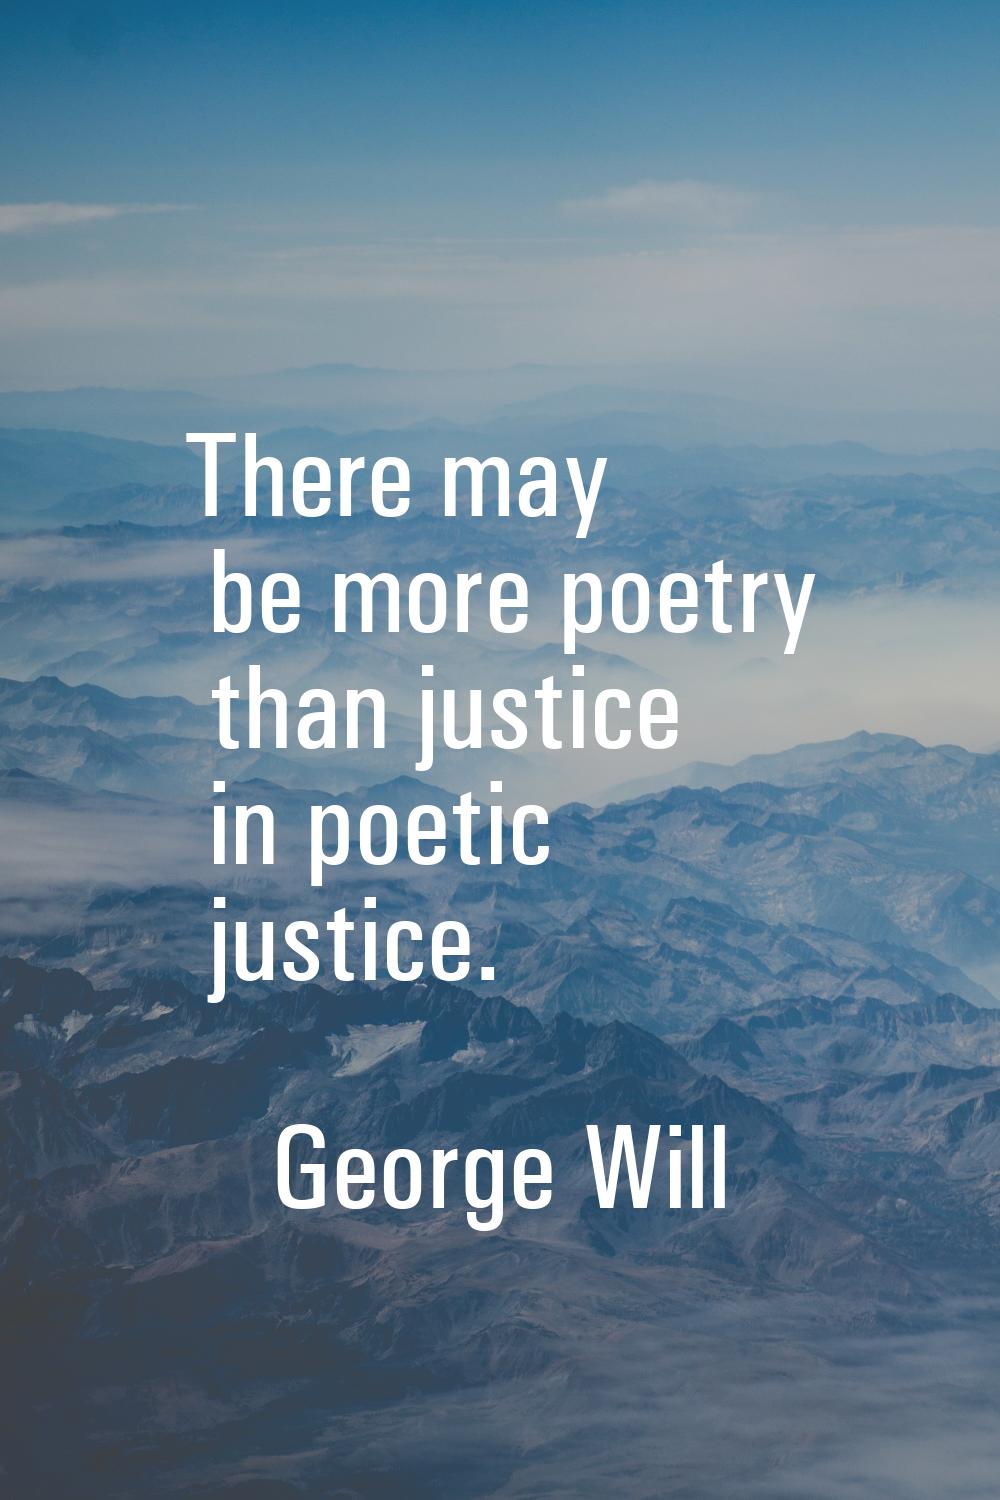 There may be more poetry than justice in poetic justice.